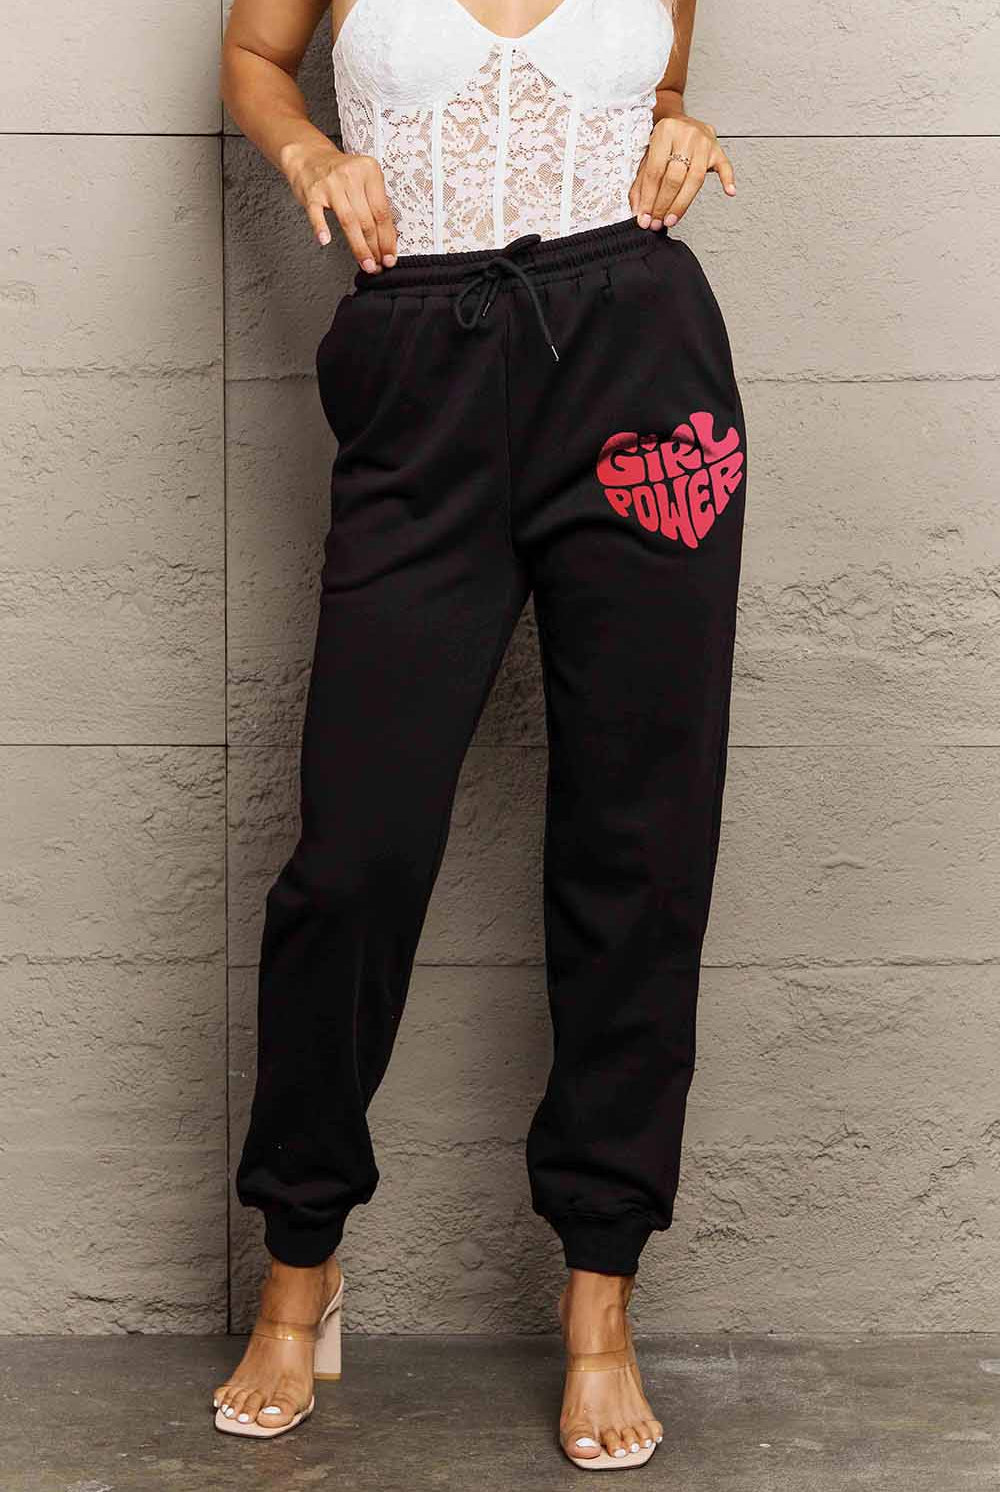 Rosy Brown Simply Love Full Size GIRL POWER Graphic Sweatpants Sweatpants